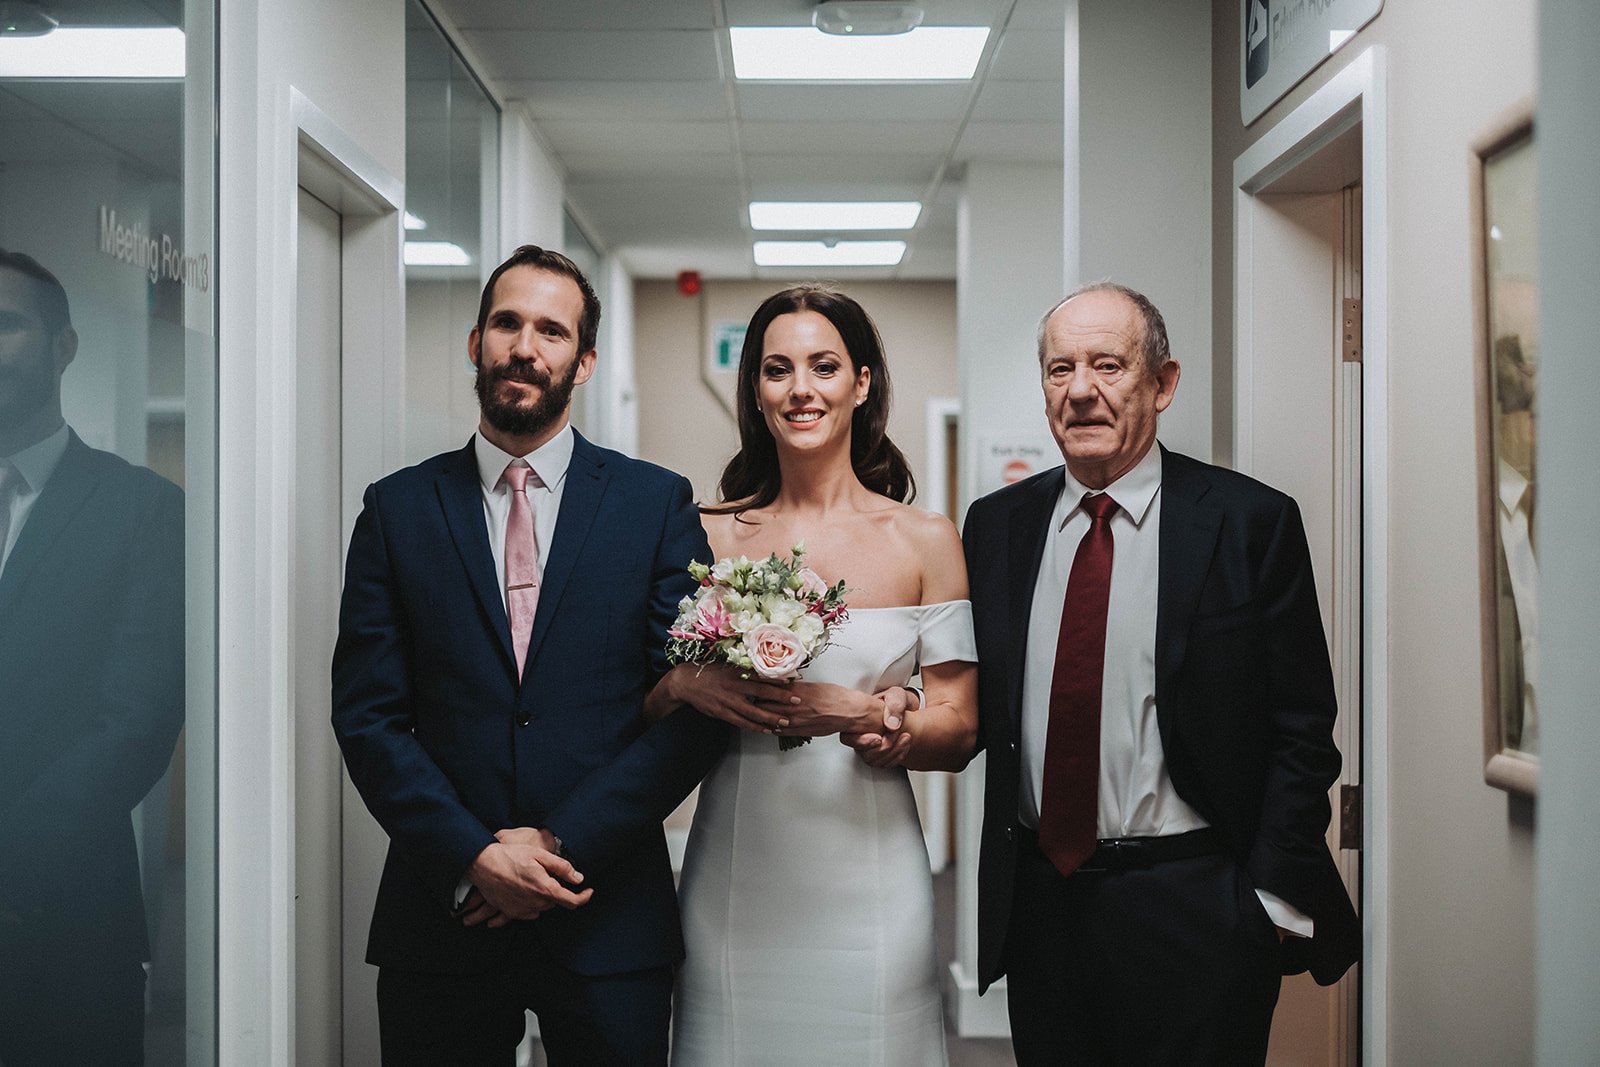  Bride is wearing a long, straight ivory, off the shoulder wedding dress, she is holding her small pink and cream hand tied bouquet in front of her. The bride is linked arms with a man on either side of her. The man on the left is wearing a blue suit